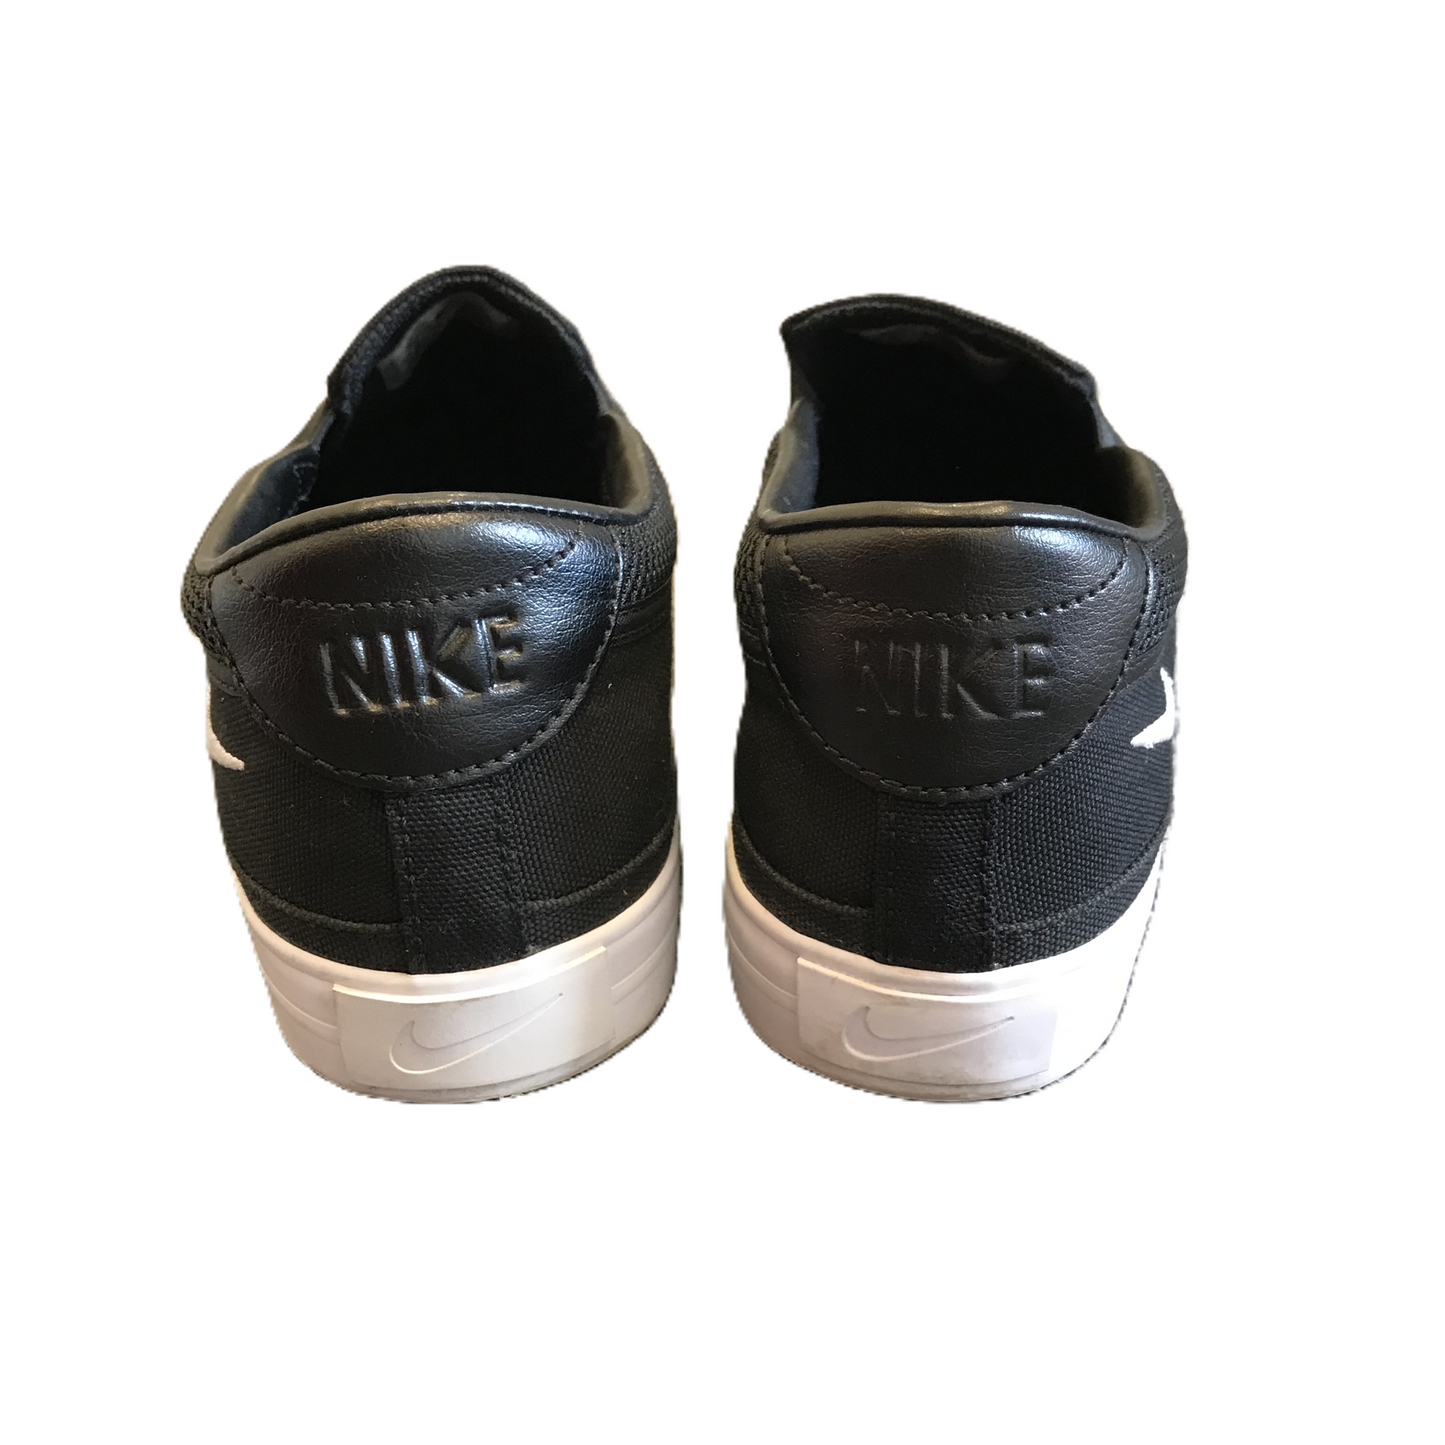 Black Shoes Flats By Nike, Size: 9